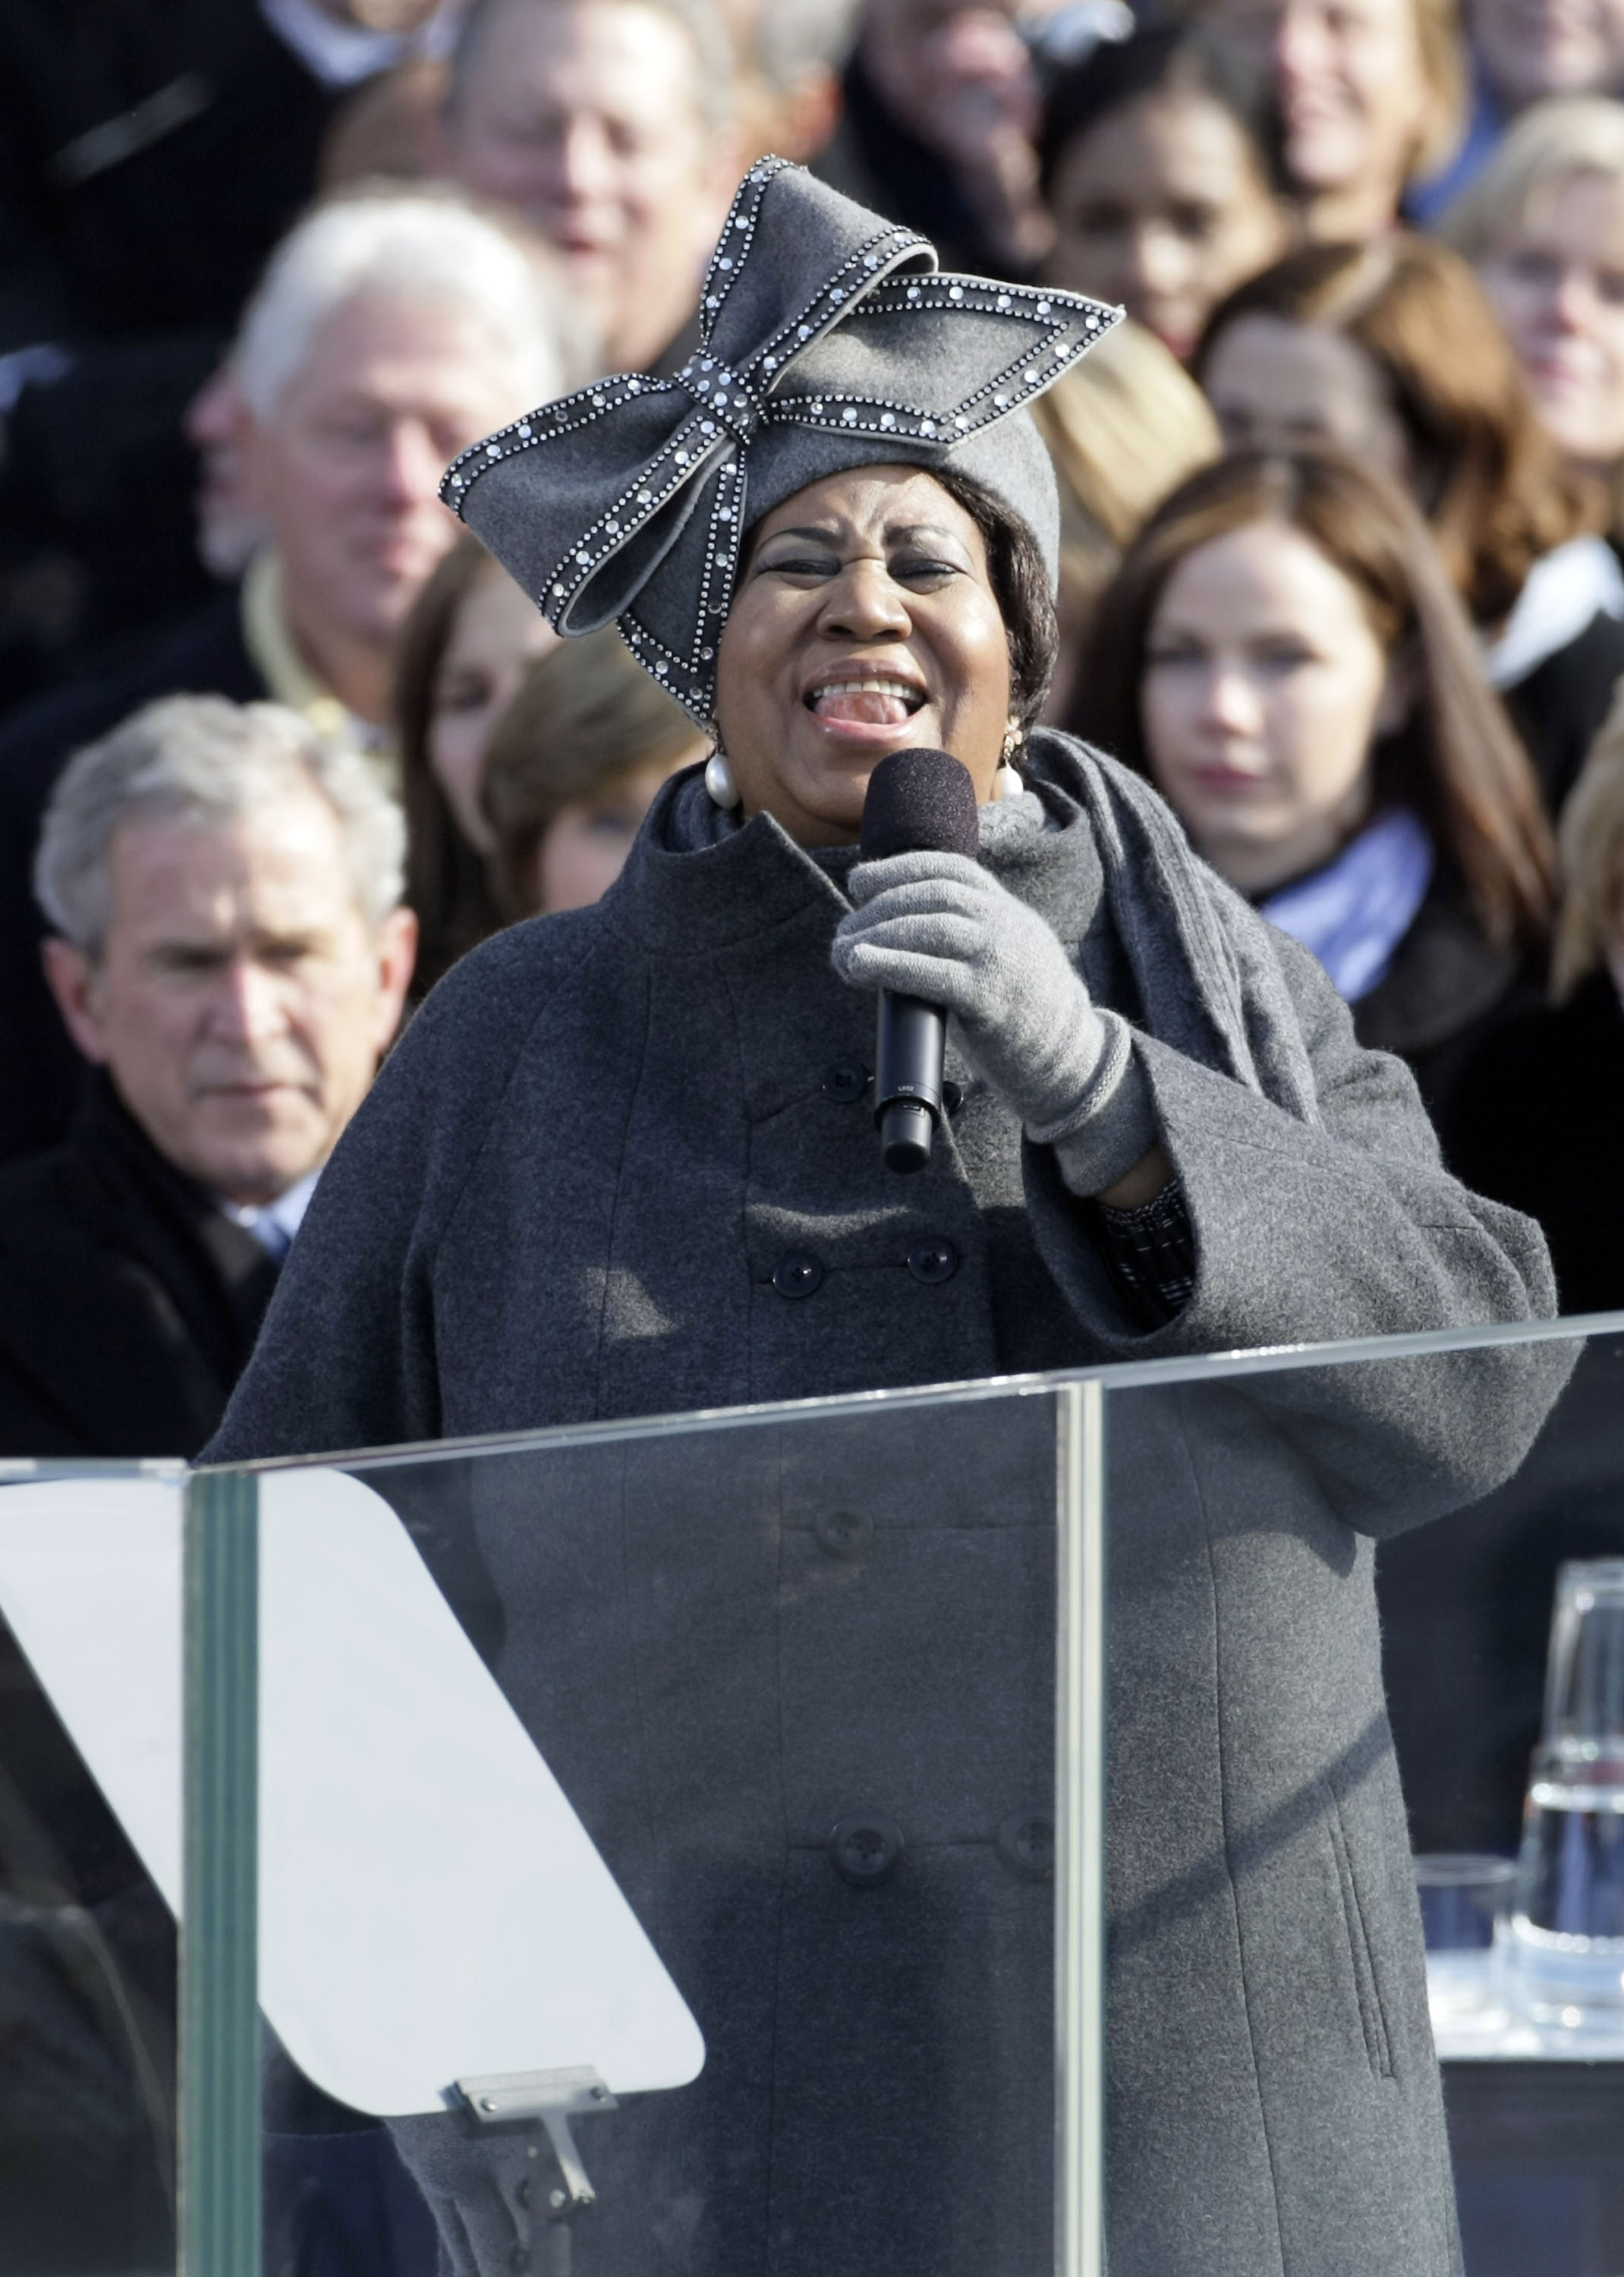 Aretha Franklin sings during the inauguration of Barack Obama on the West Front of the Capitol January 20, 2009, in Washington, DC. | Source: Getty Images